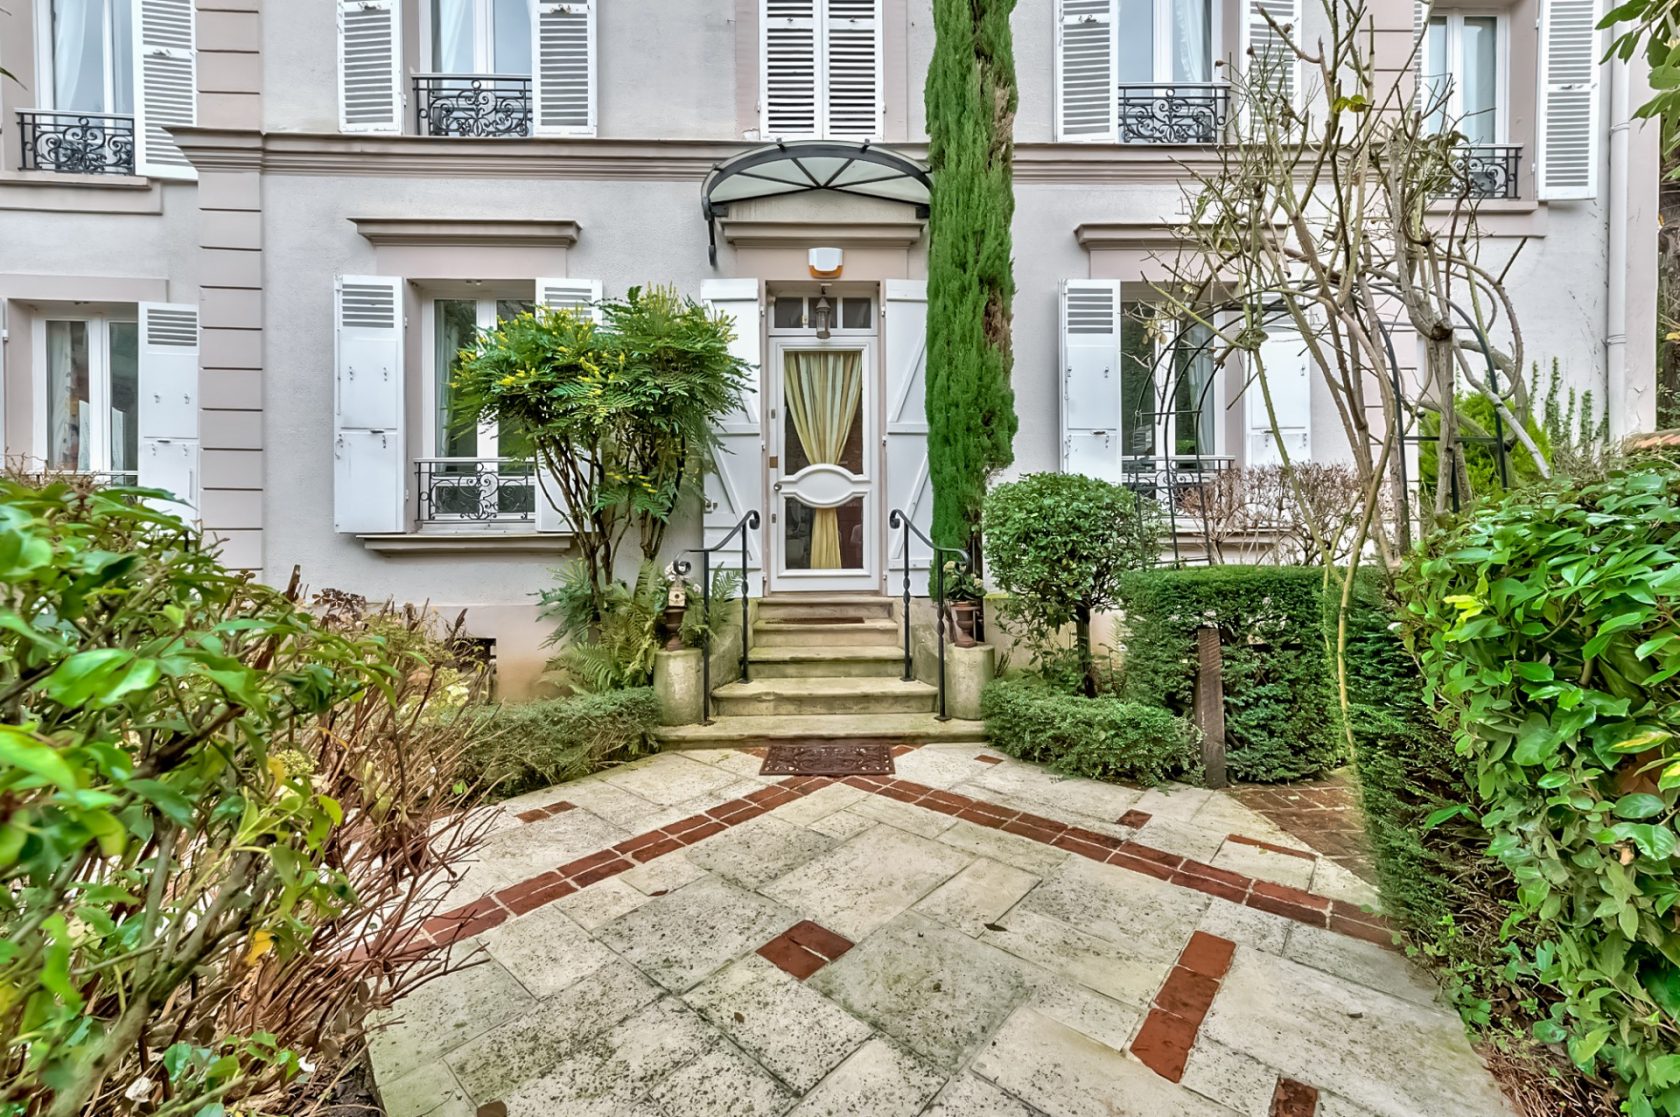 Townhouse with garden to revisit